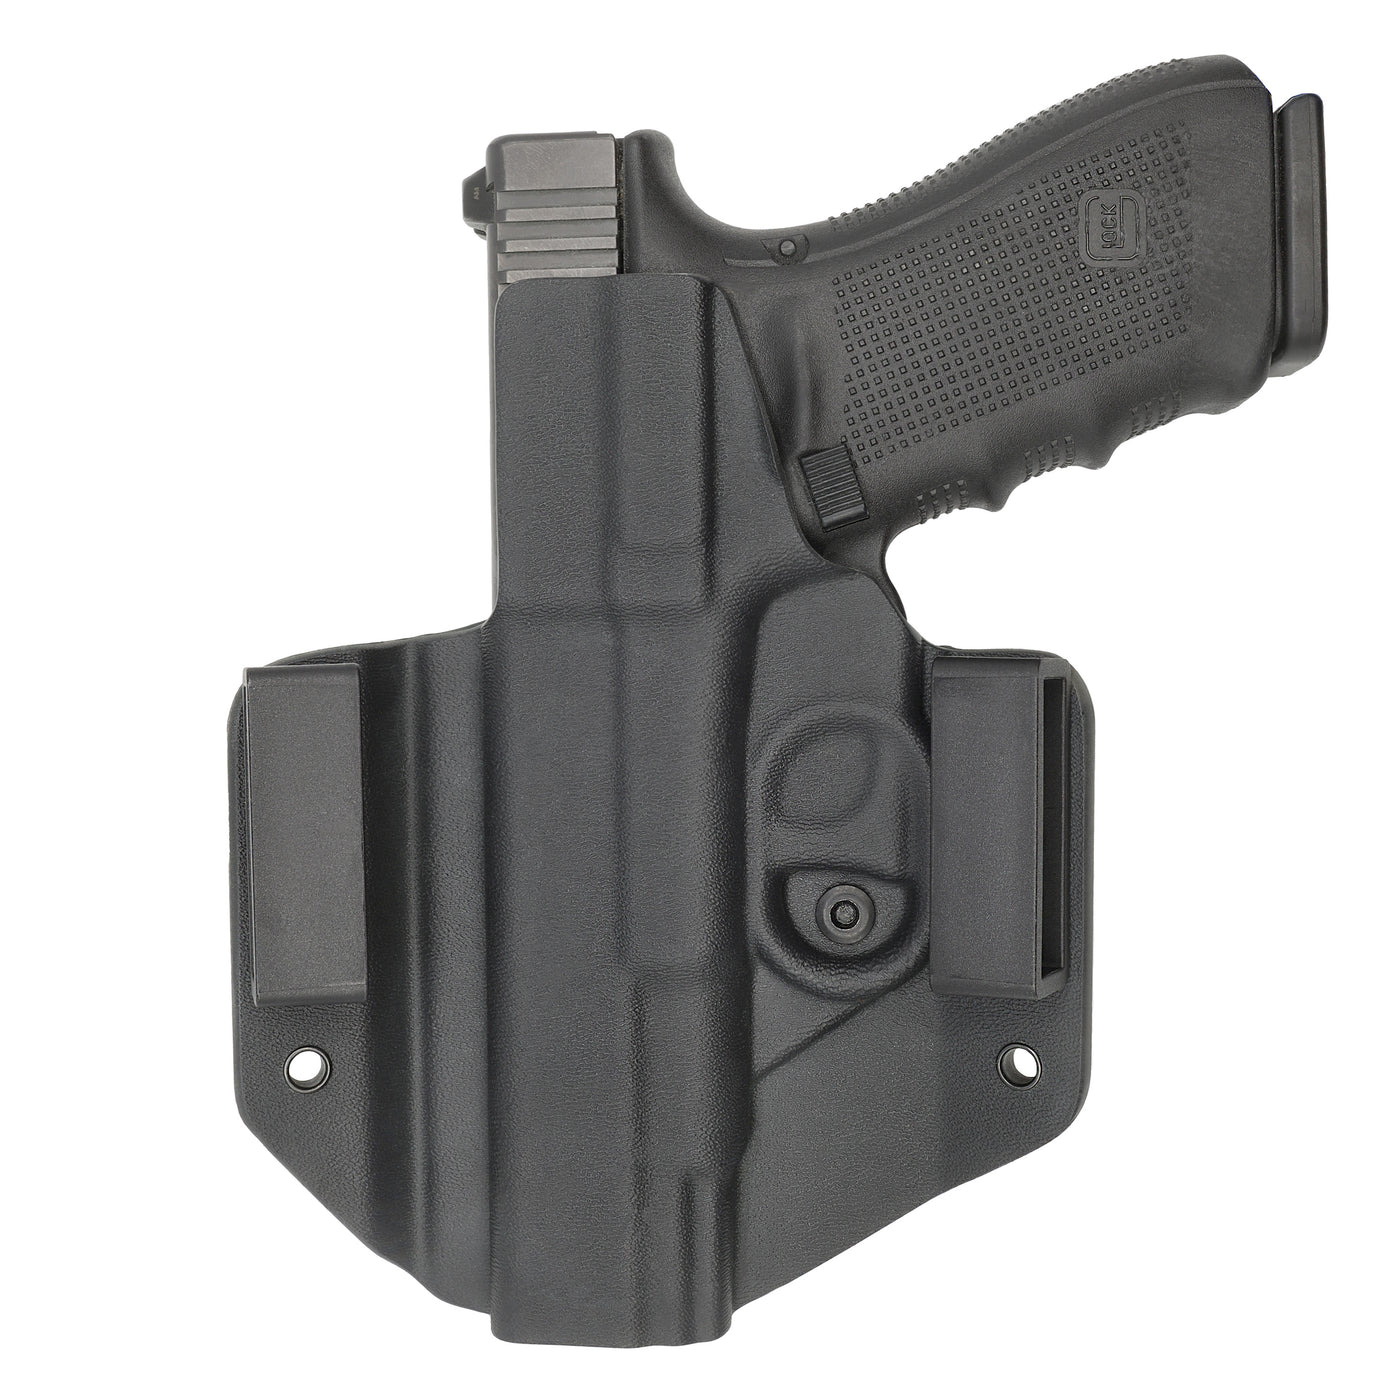 C&G Holsters quickship OWB covert Glock 20/21 in holstered position back view